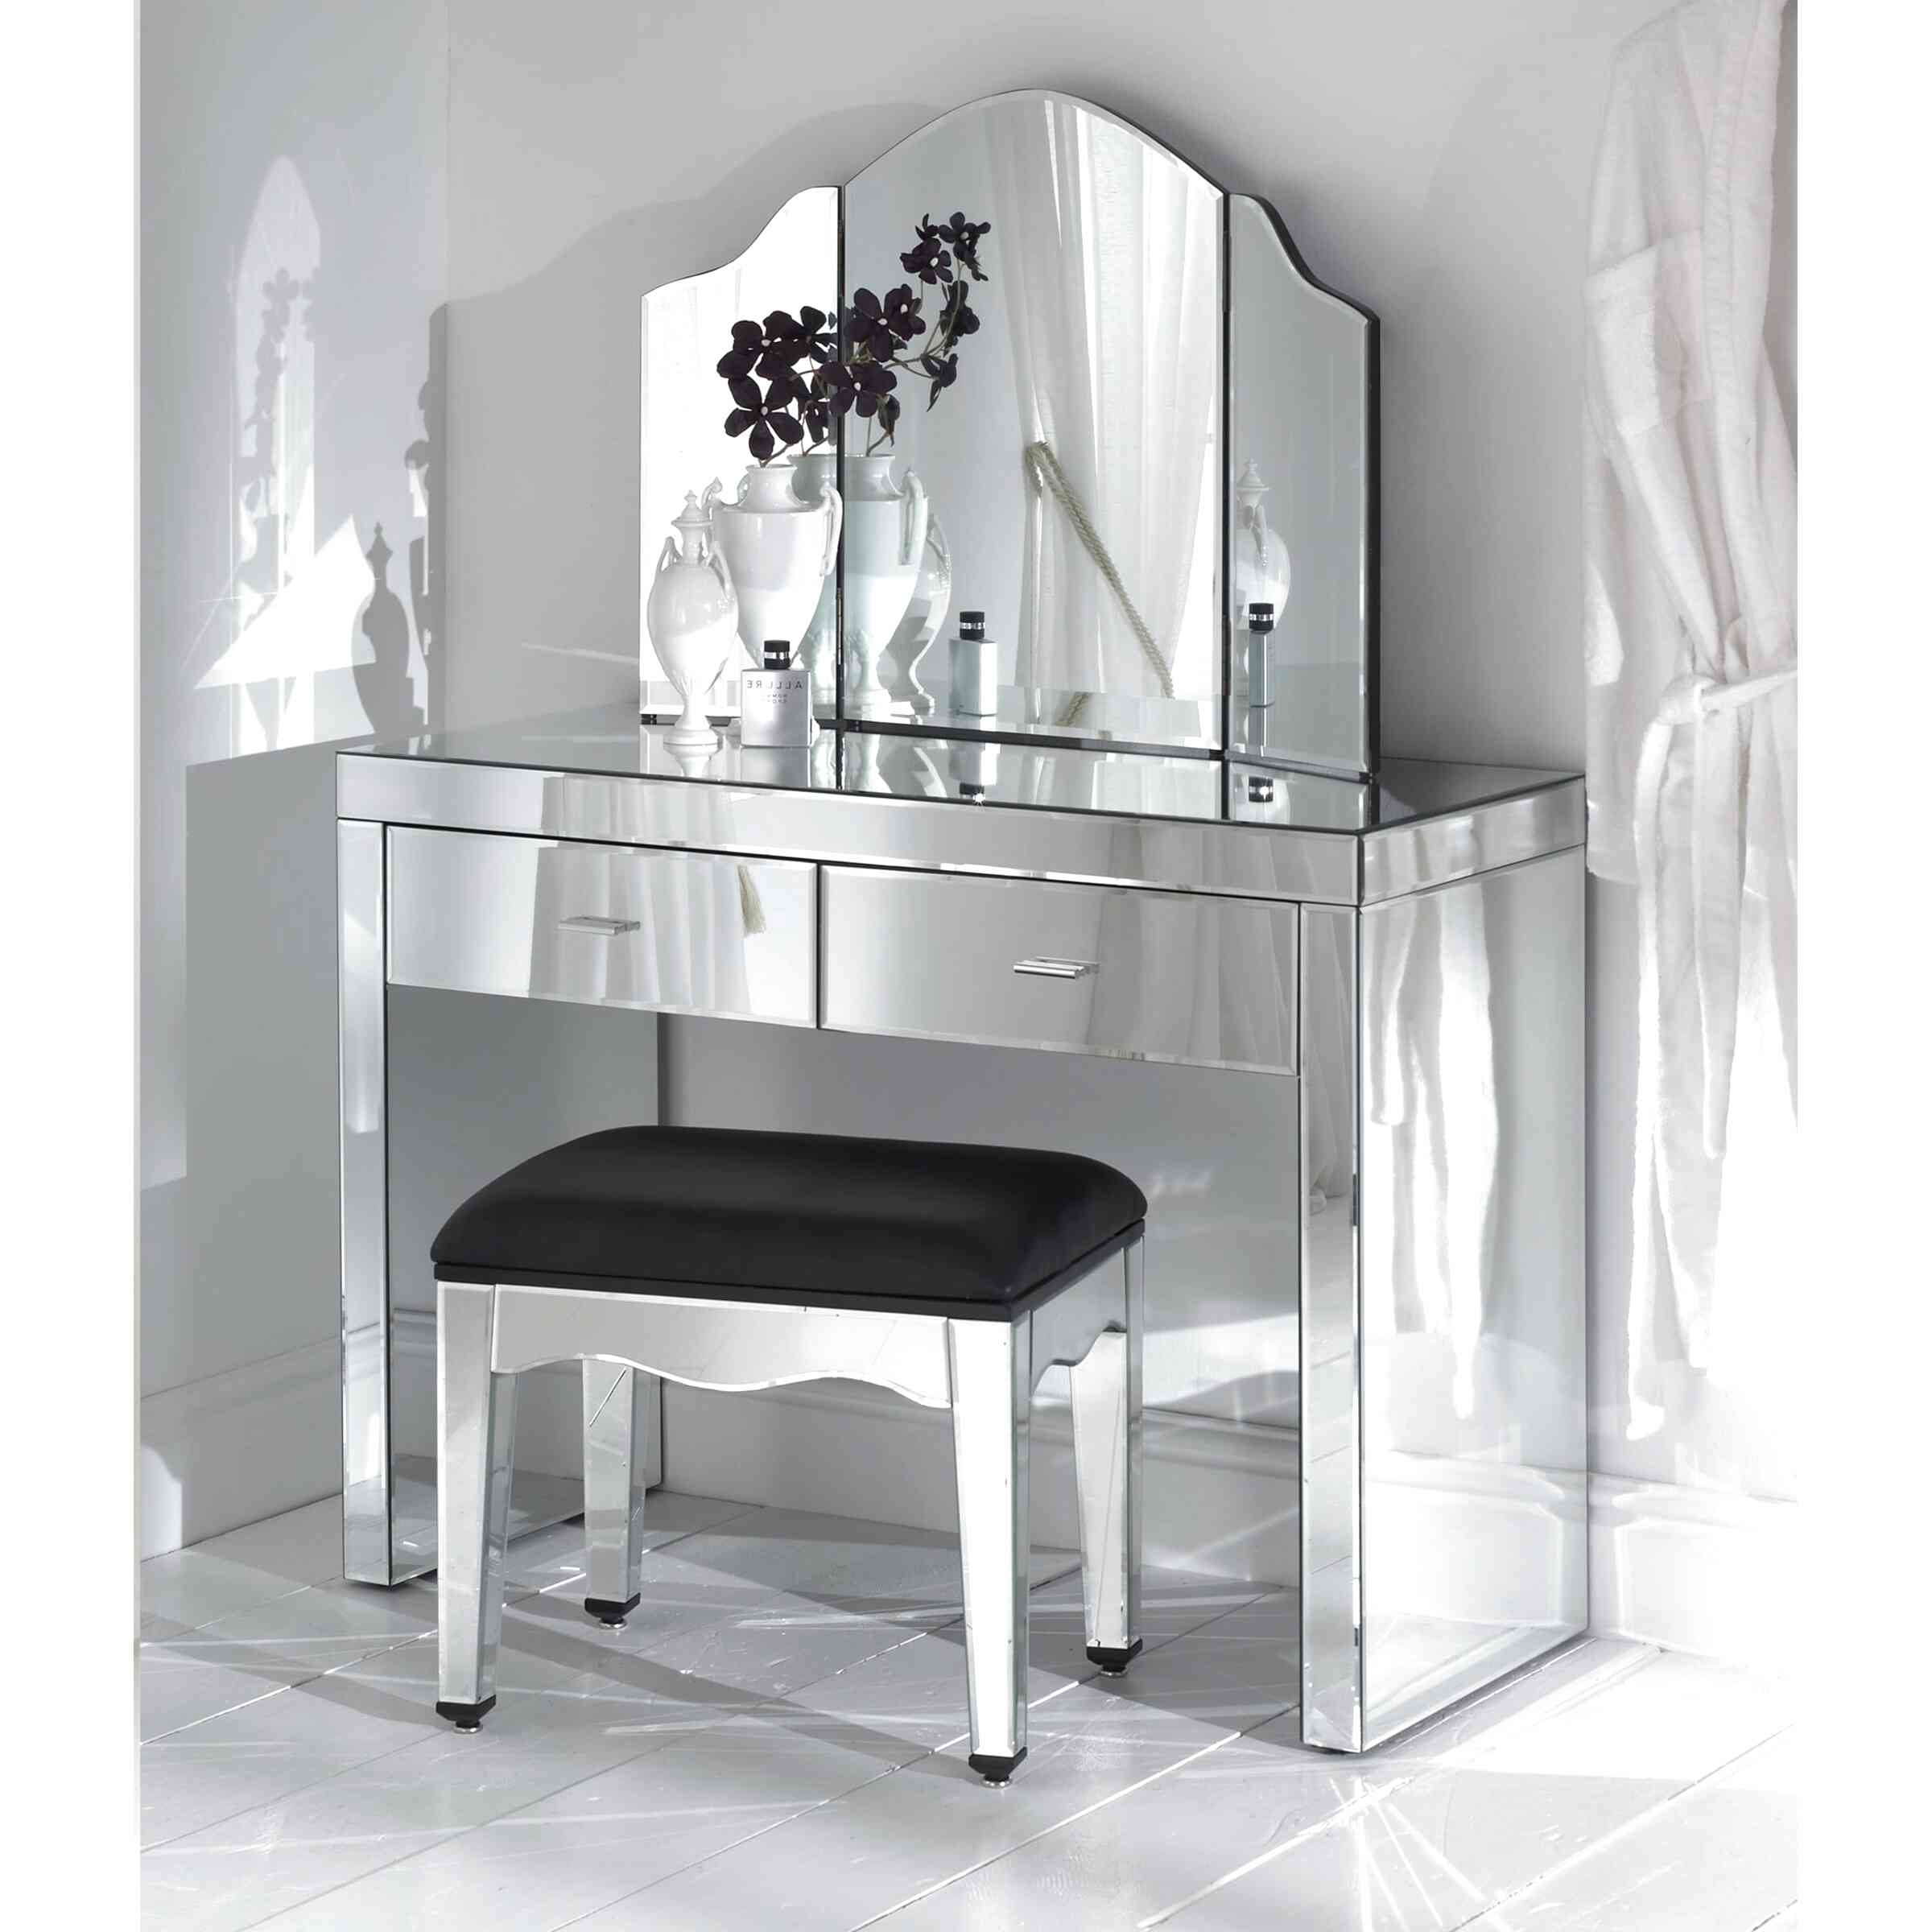 Mirrored Dressing In Ireland, Mirrored Dressing Table With Drawers Ireland